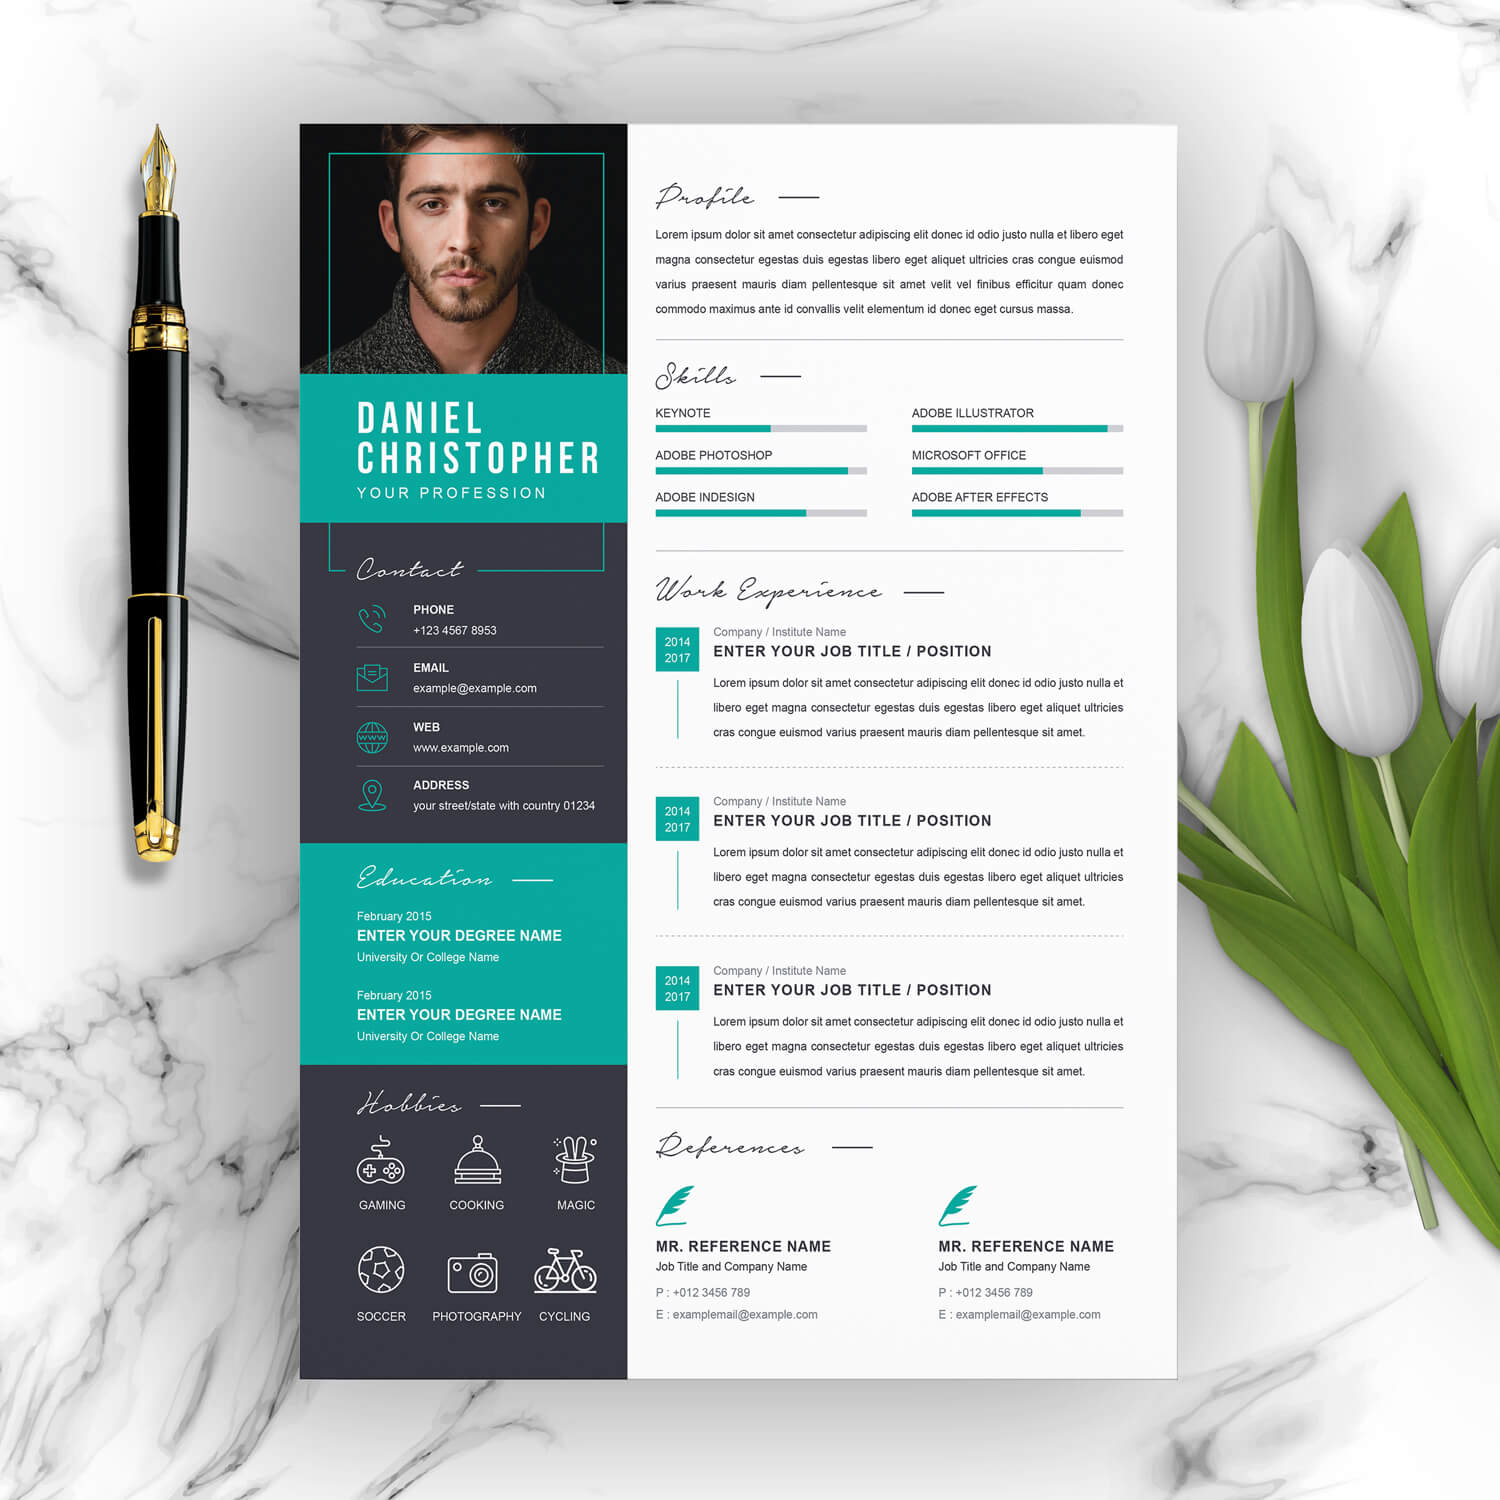 01_Clean-Professional-Creative-and-Modern-Resume-CV-Curriculum-Vitae-Design-Template-MS-Word-Apple-Pages-PSD-Free-Download-15-4 15 Creative Ways You Can Improve Your resume